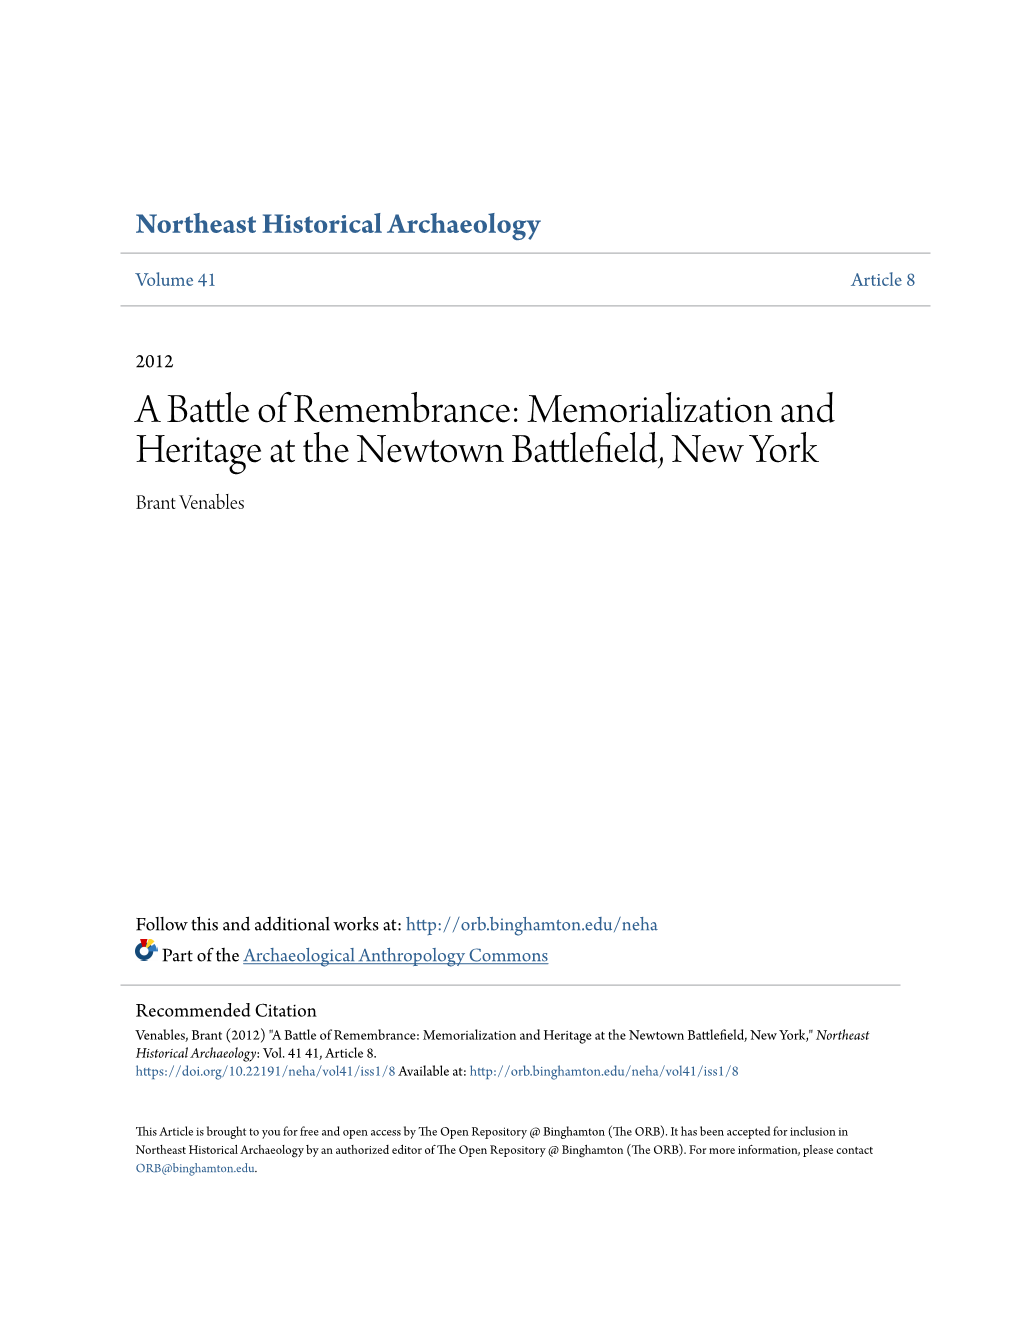 Memorialization and Heritage at the Newtown Battlefield, New York Brant Venables